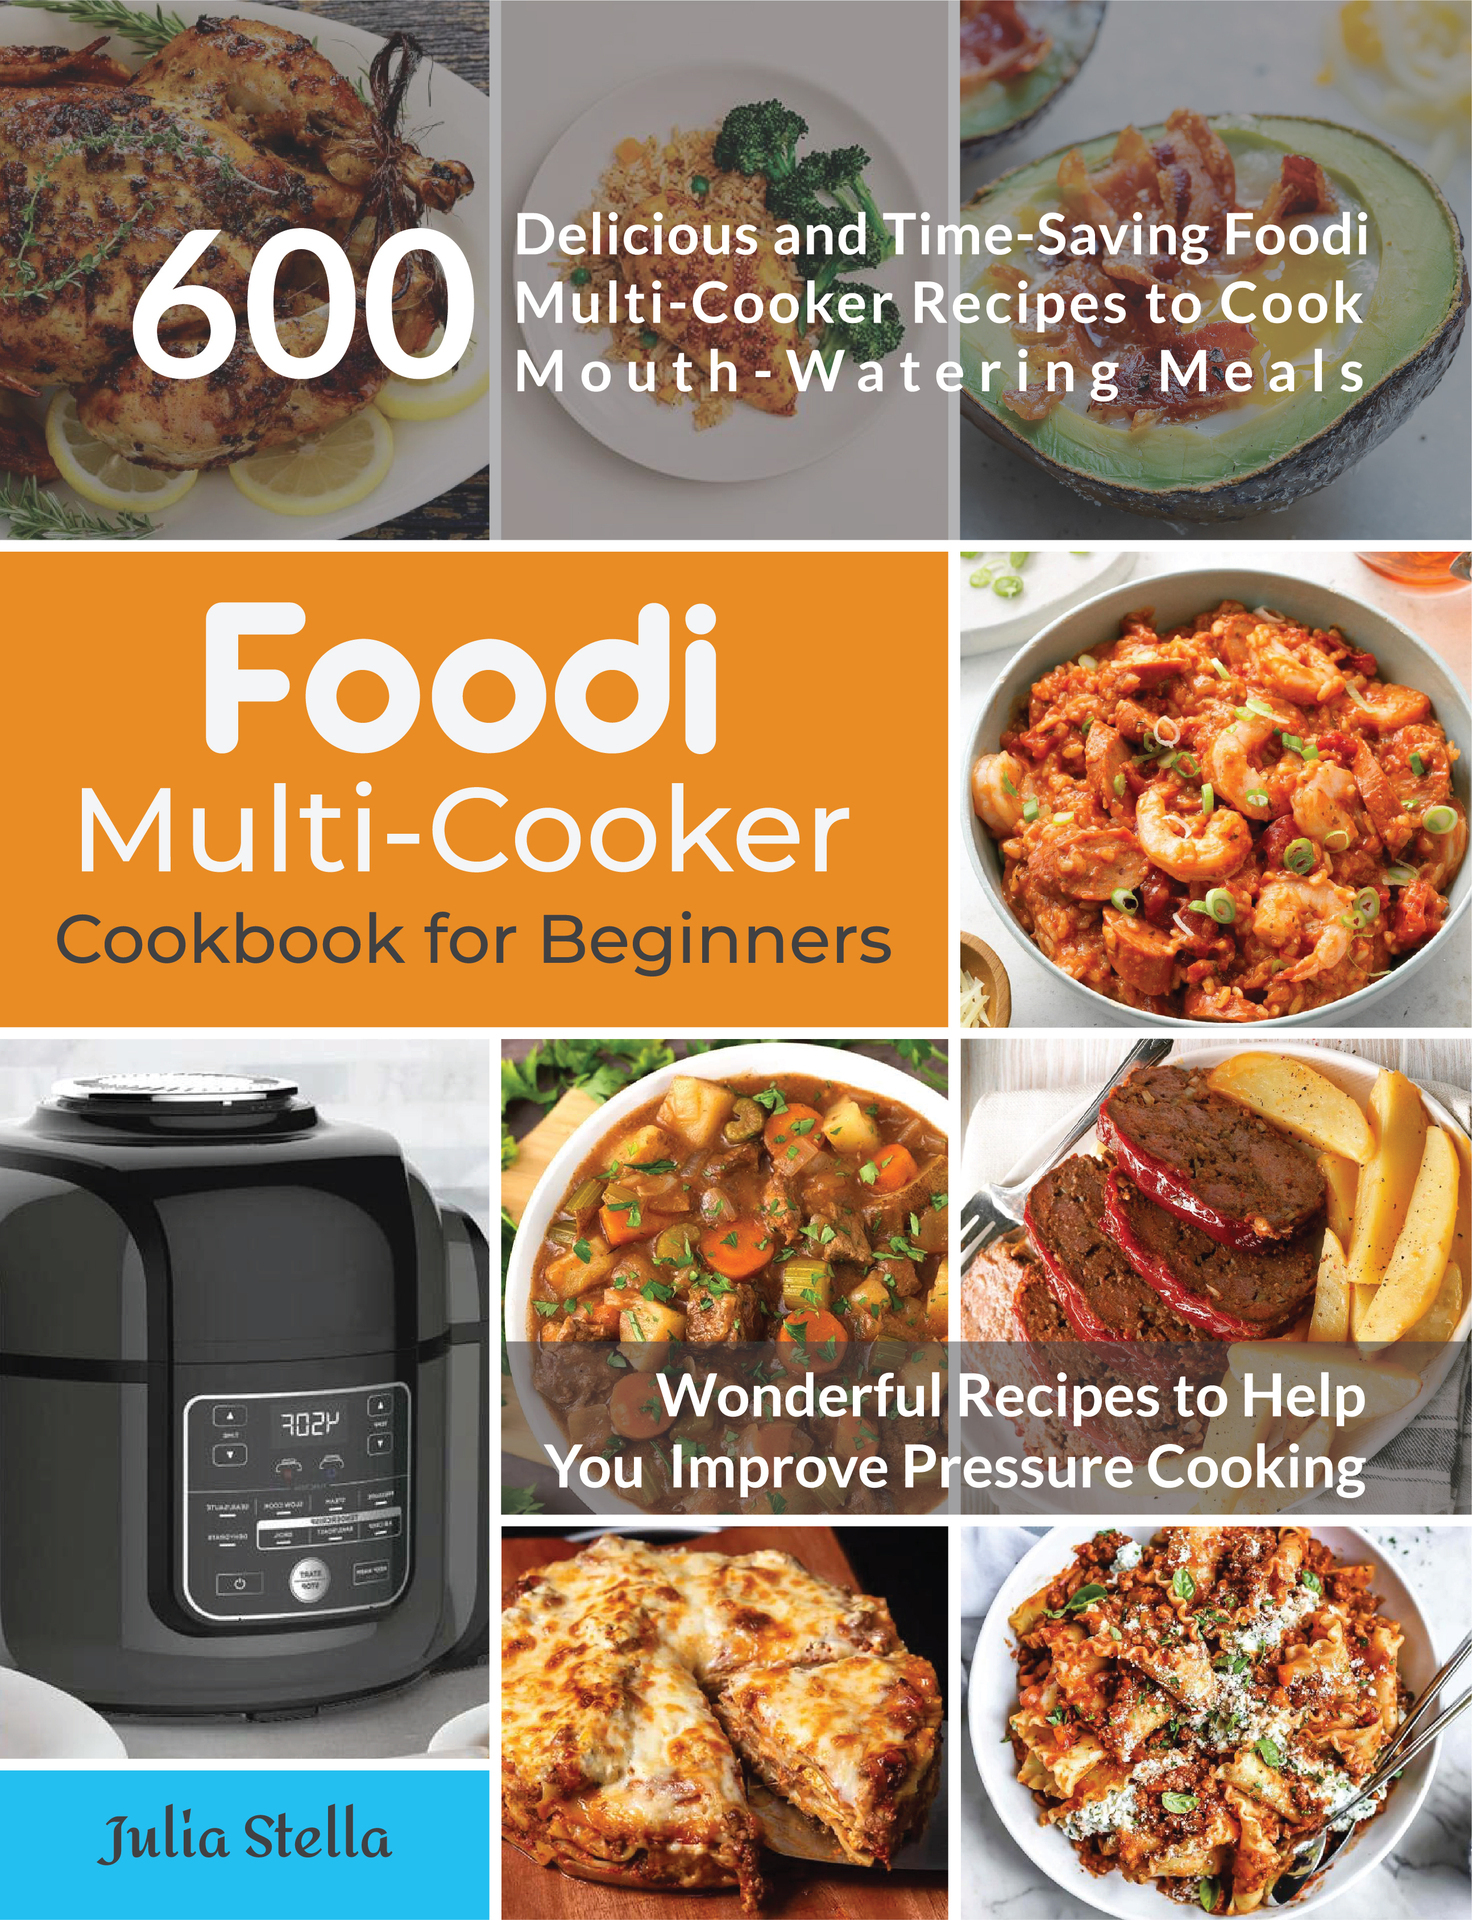 Foodi Multi-Cooker Cookbook for Beginners 600 Delicious and Time Saving Foodi - photo 1